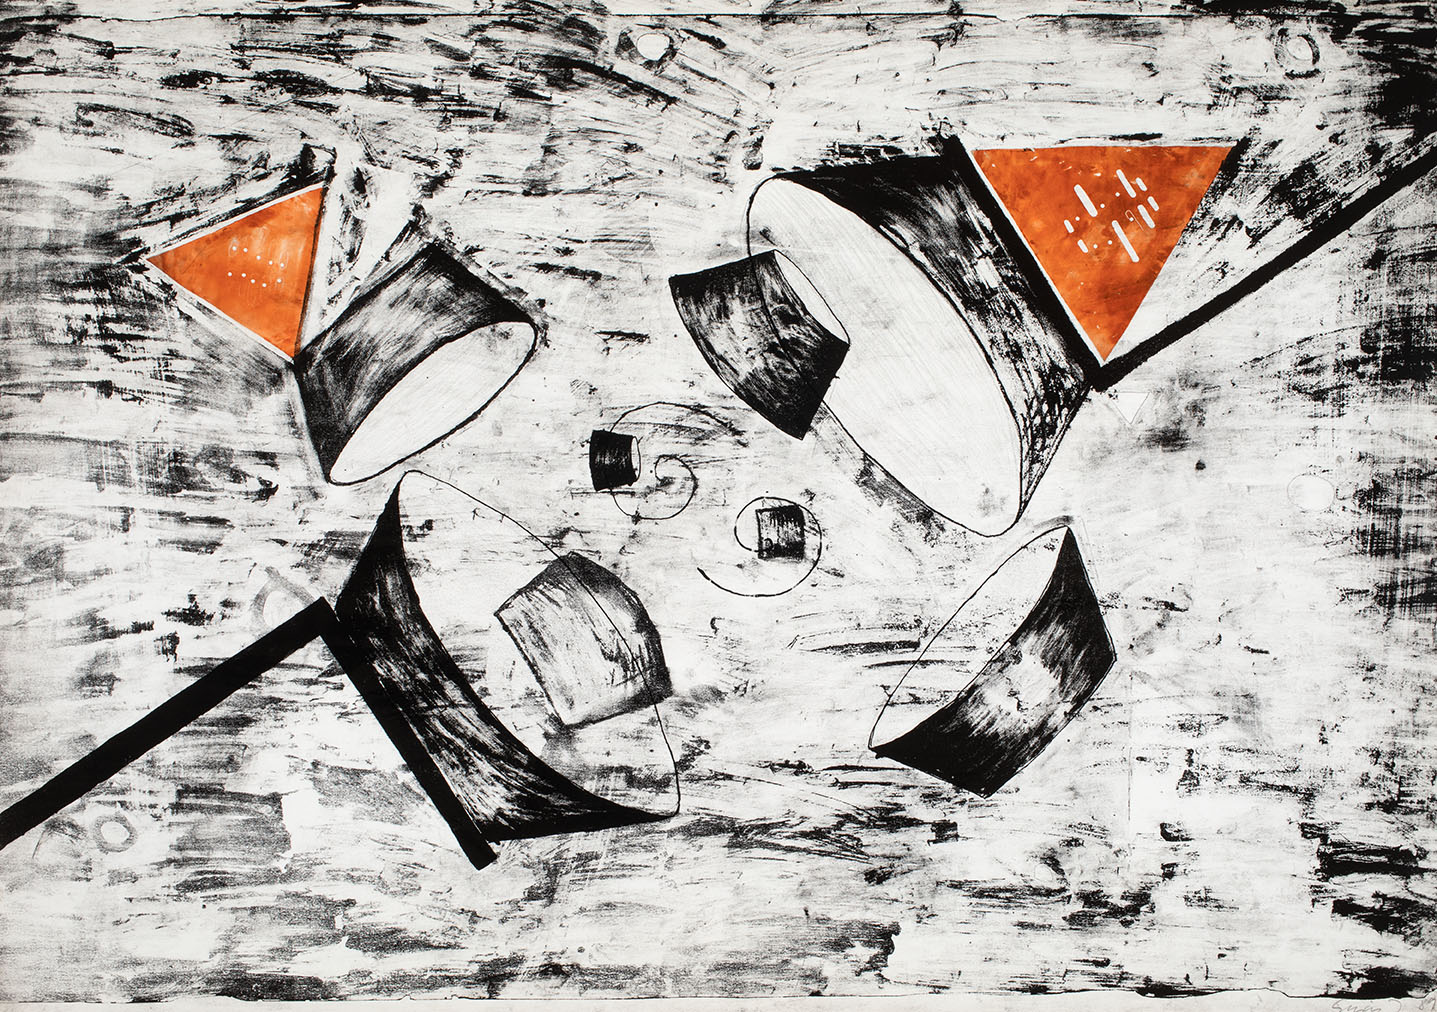 János SUGÁR: The Reorganised Experience, 1988, lithography, dry-point, 70 × 100 cm, ed. 2/2